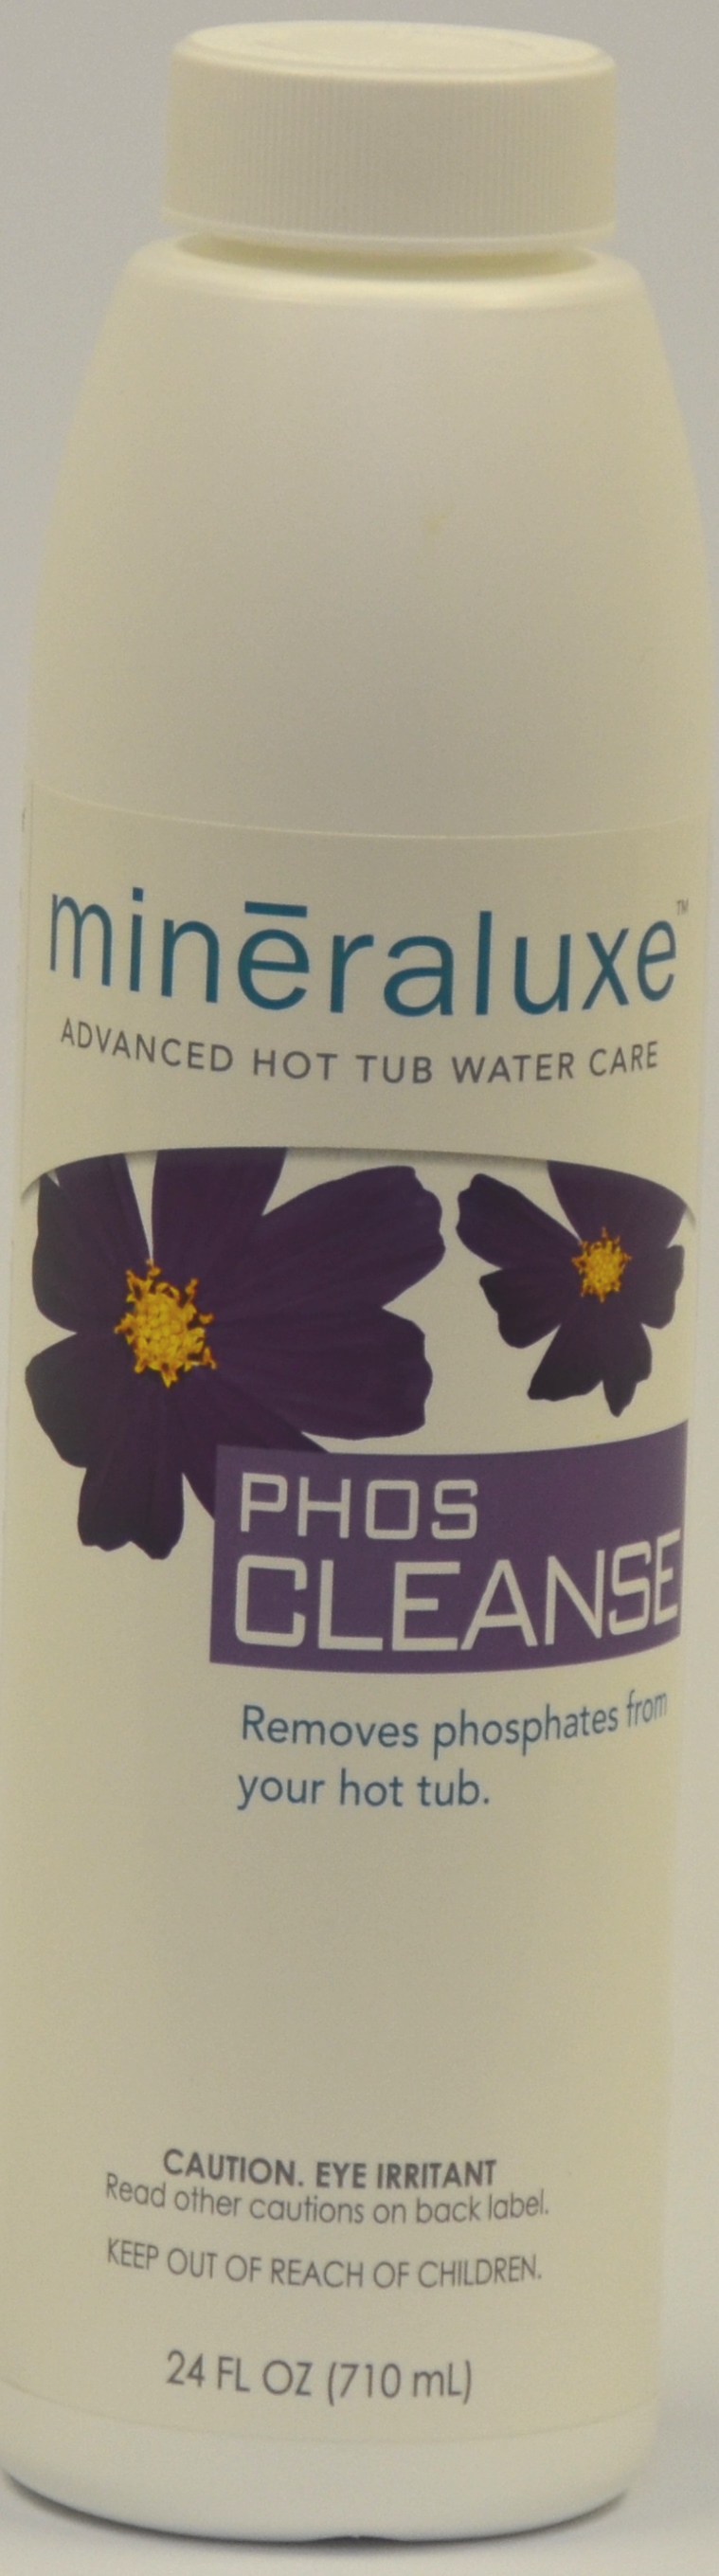 Mineraluxe Phos Cleanse 16 X 24 oz - LINERS